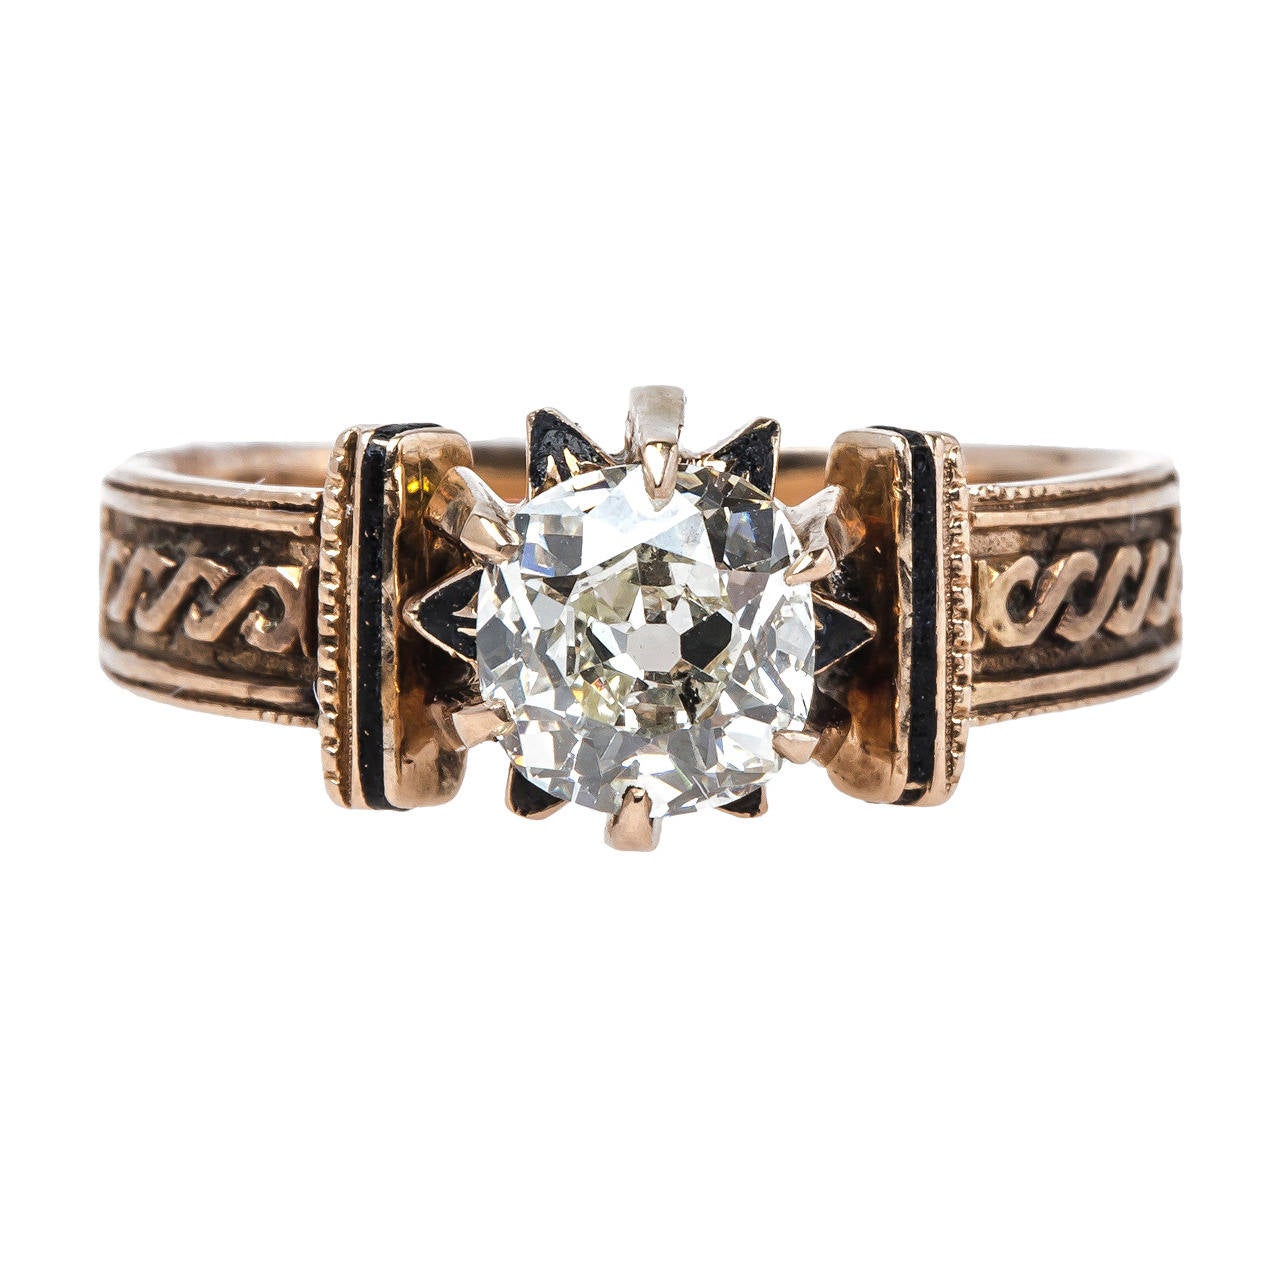 Early Victorian Diamond Solitaire Engagement Ring with Starburst Design